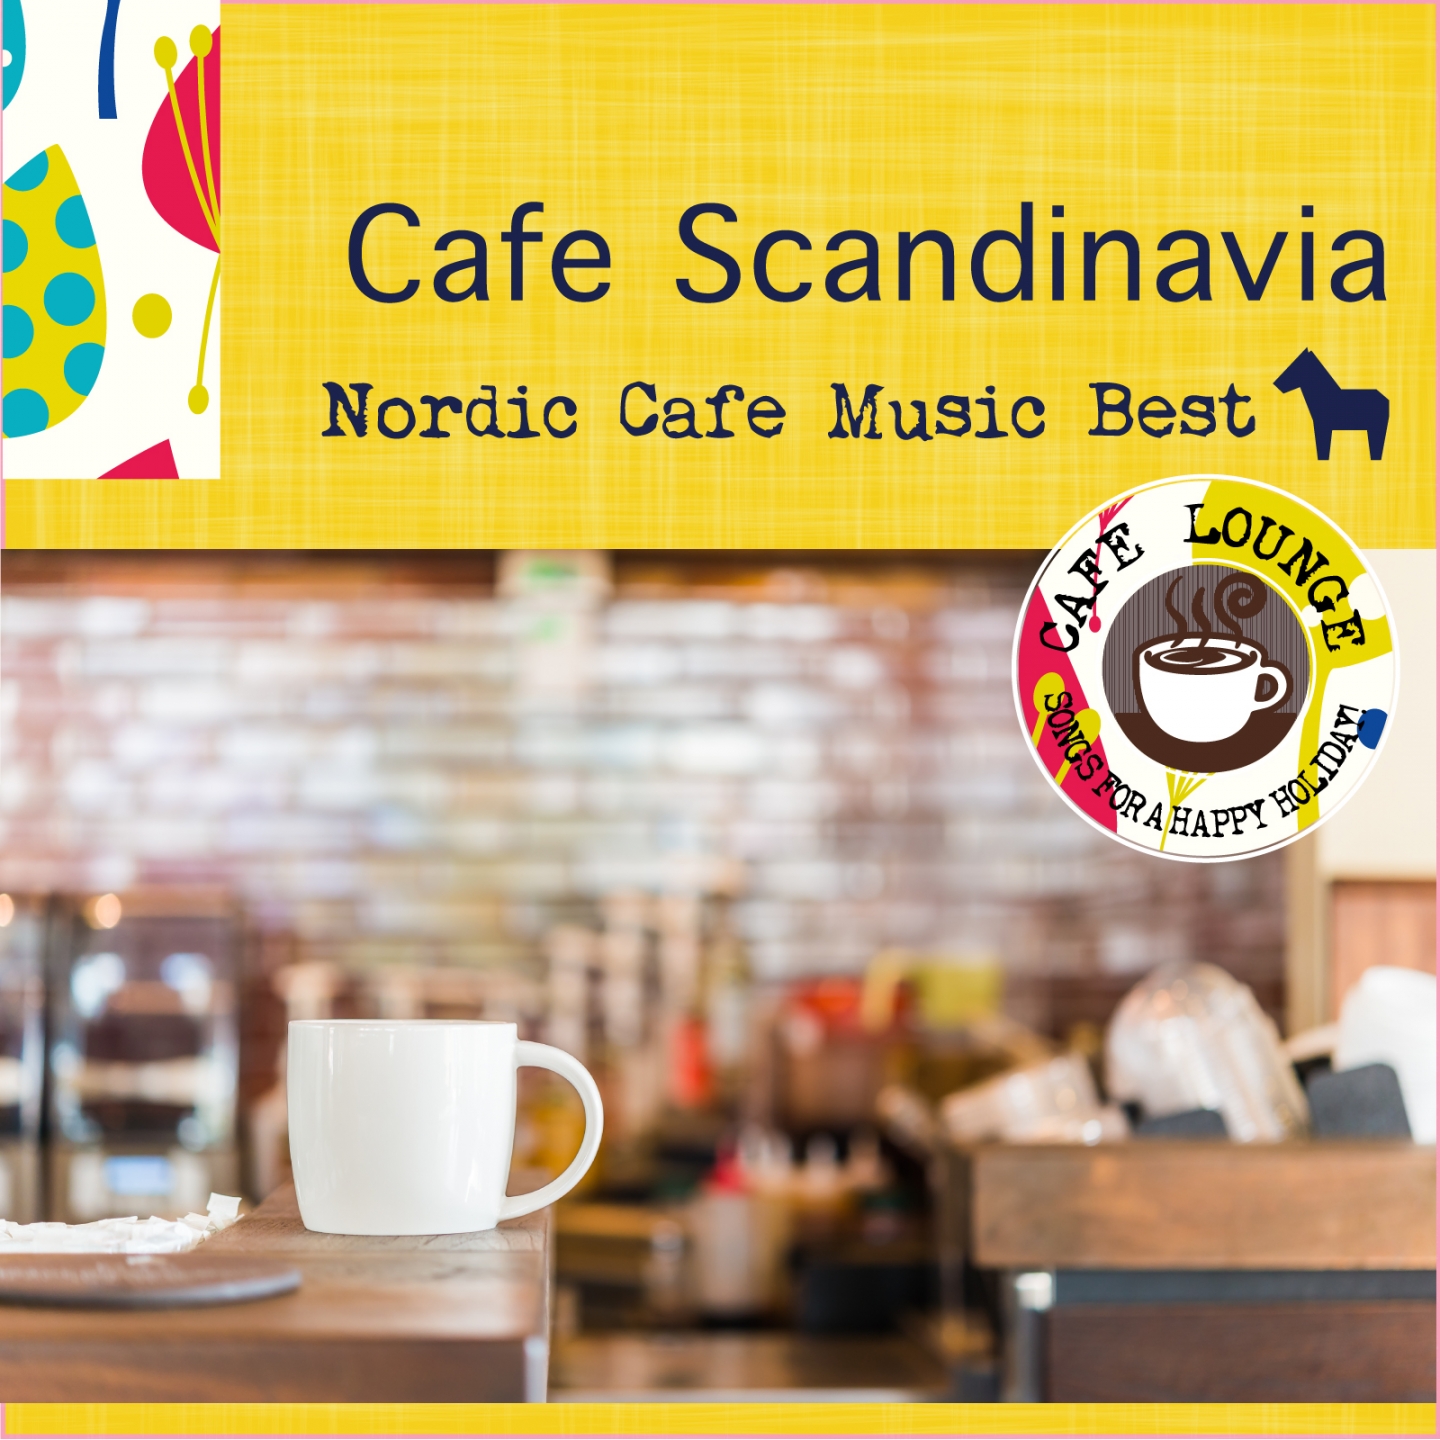 The Best of Nordic Popular Lounge Music: Cafe Scandinavia